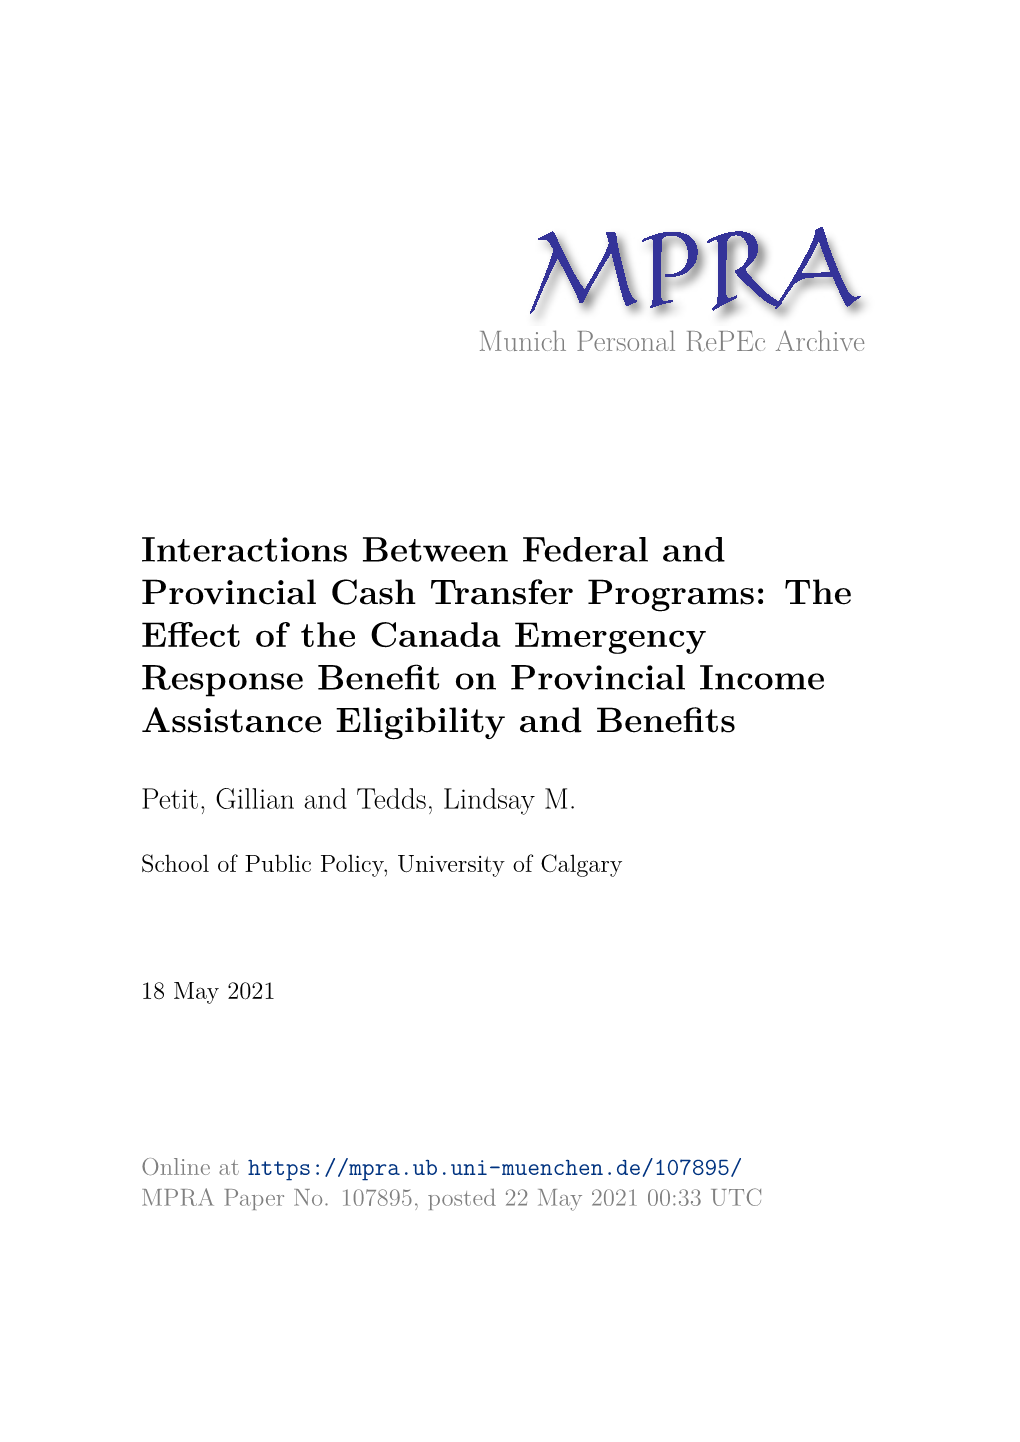 Interactions Between Federal and Provincial Cash Transfer Programs